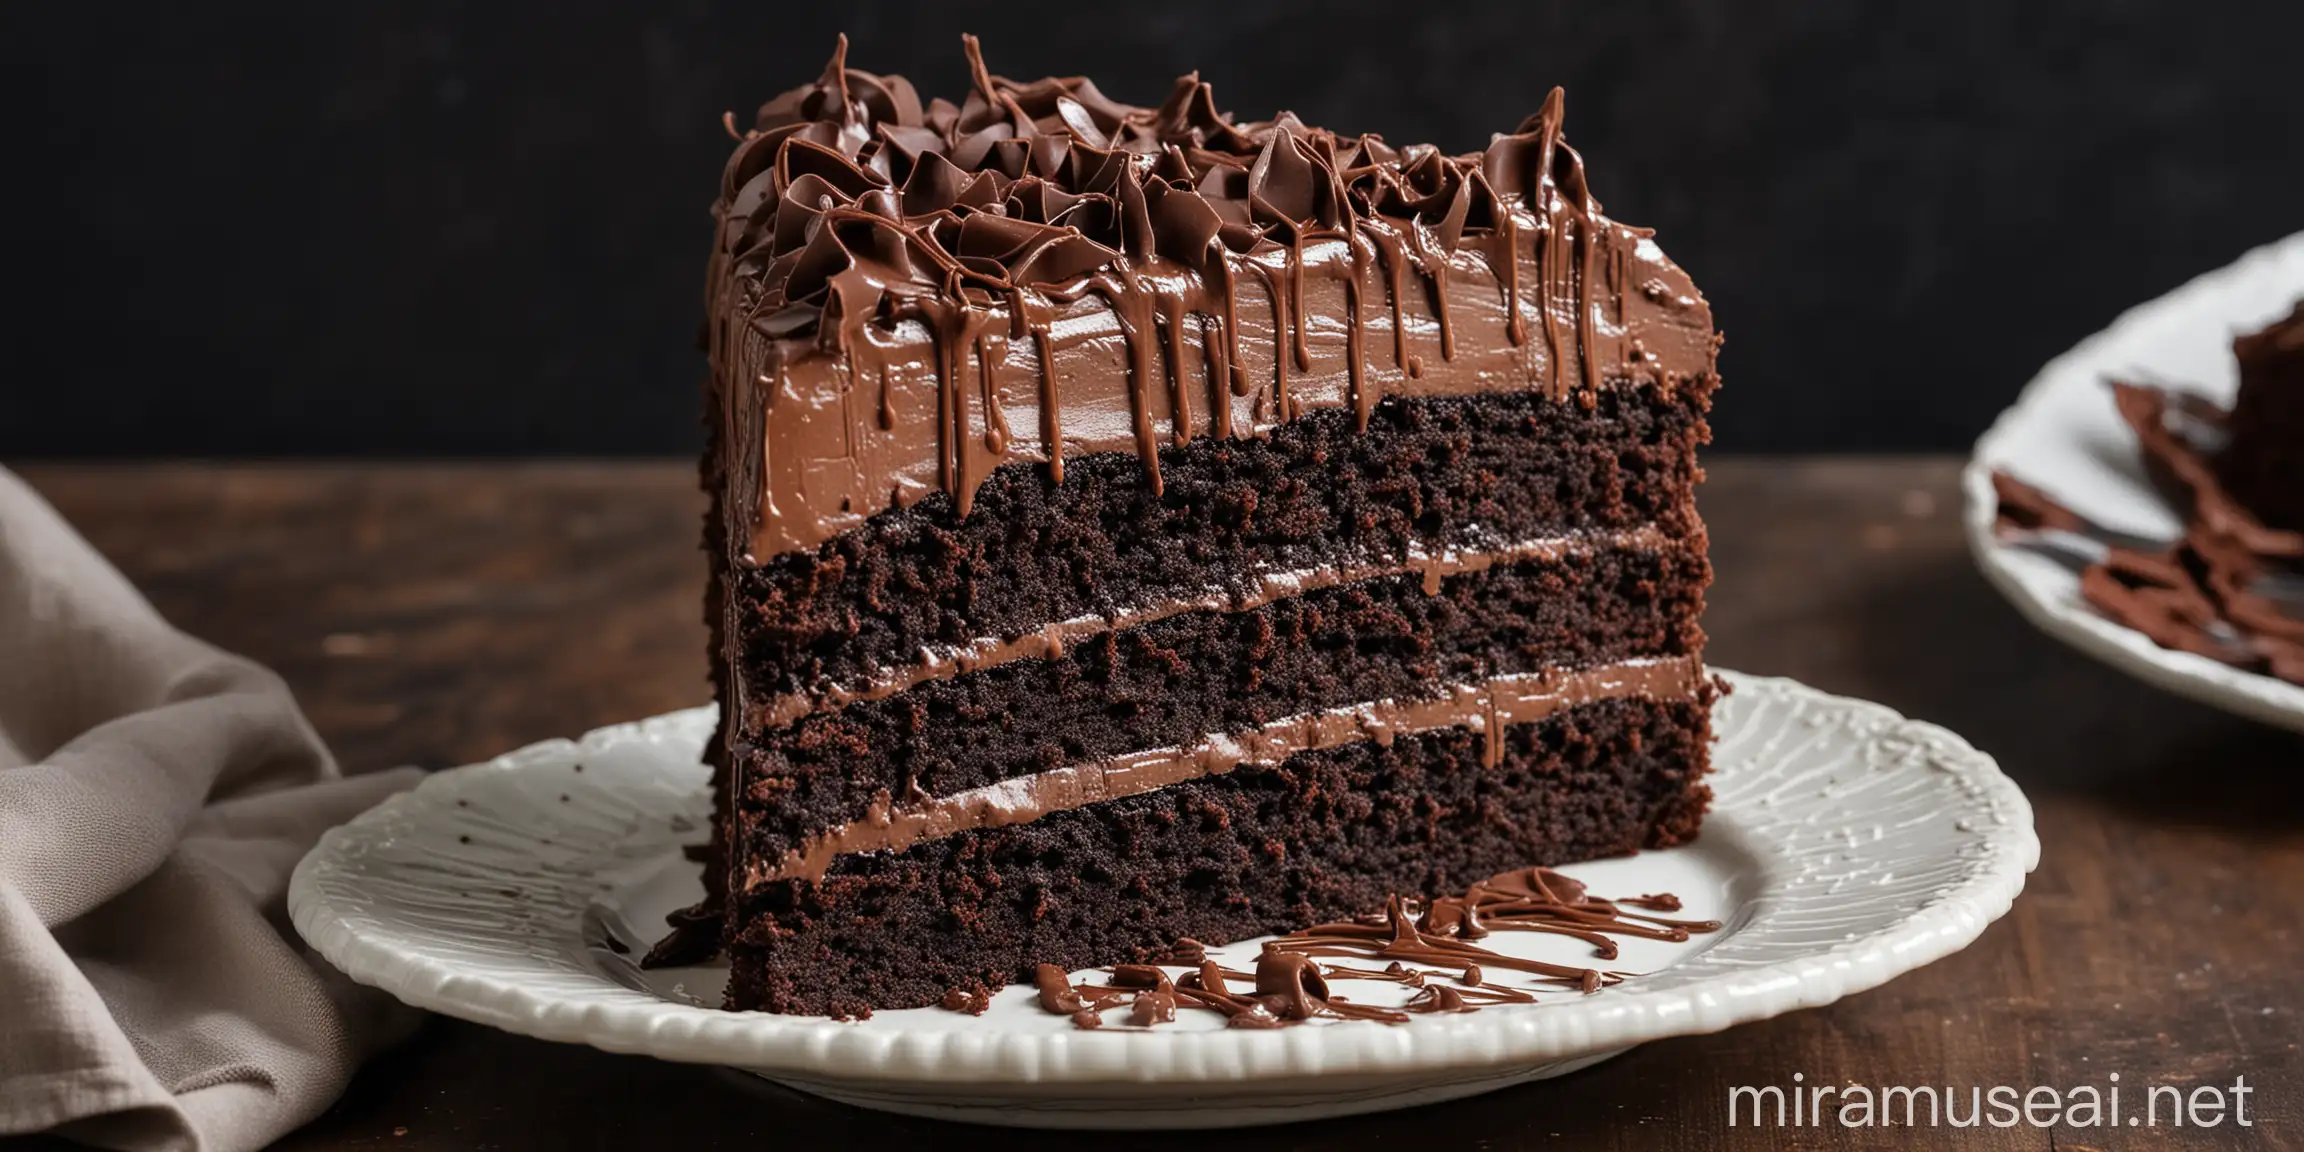 A decadent slice of chocolate cake, with rich layers of moist cake, creamy frosting, and a drizzle of chocolate ganache on top. The cake is so large, it barely fits on the plate, and the chocolatey aroma is irresistible.